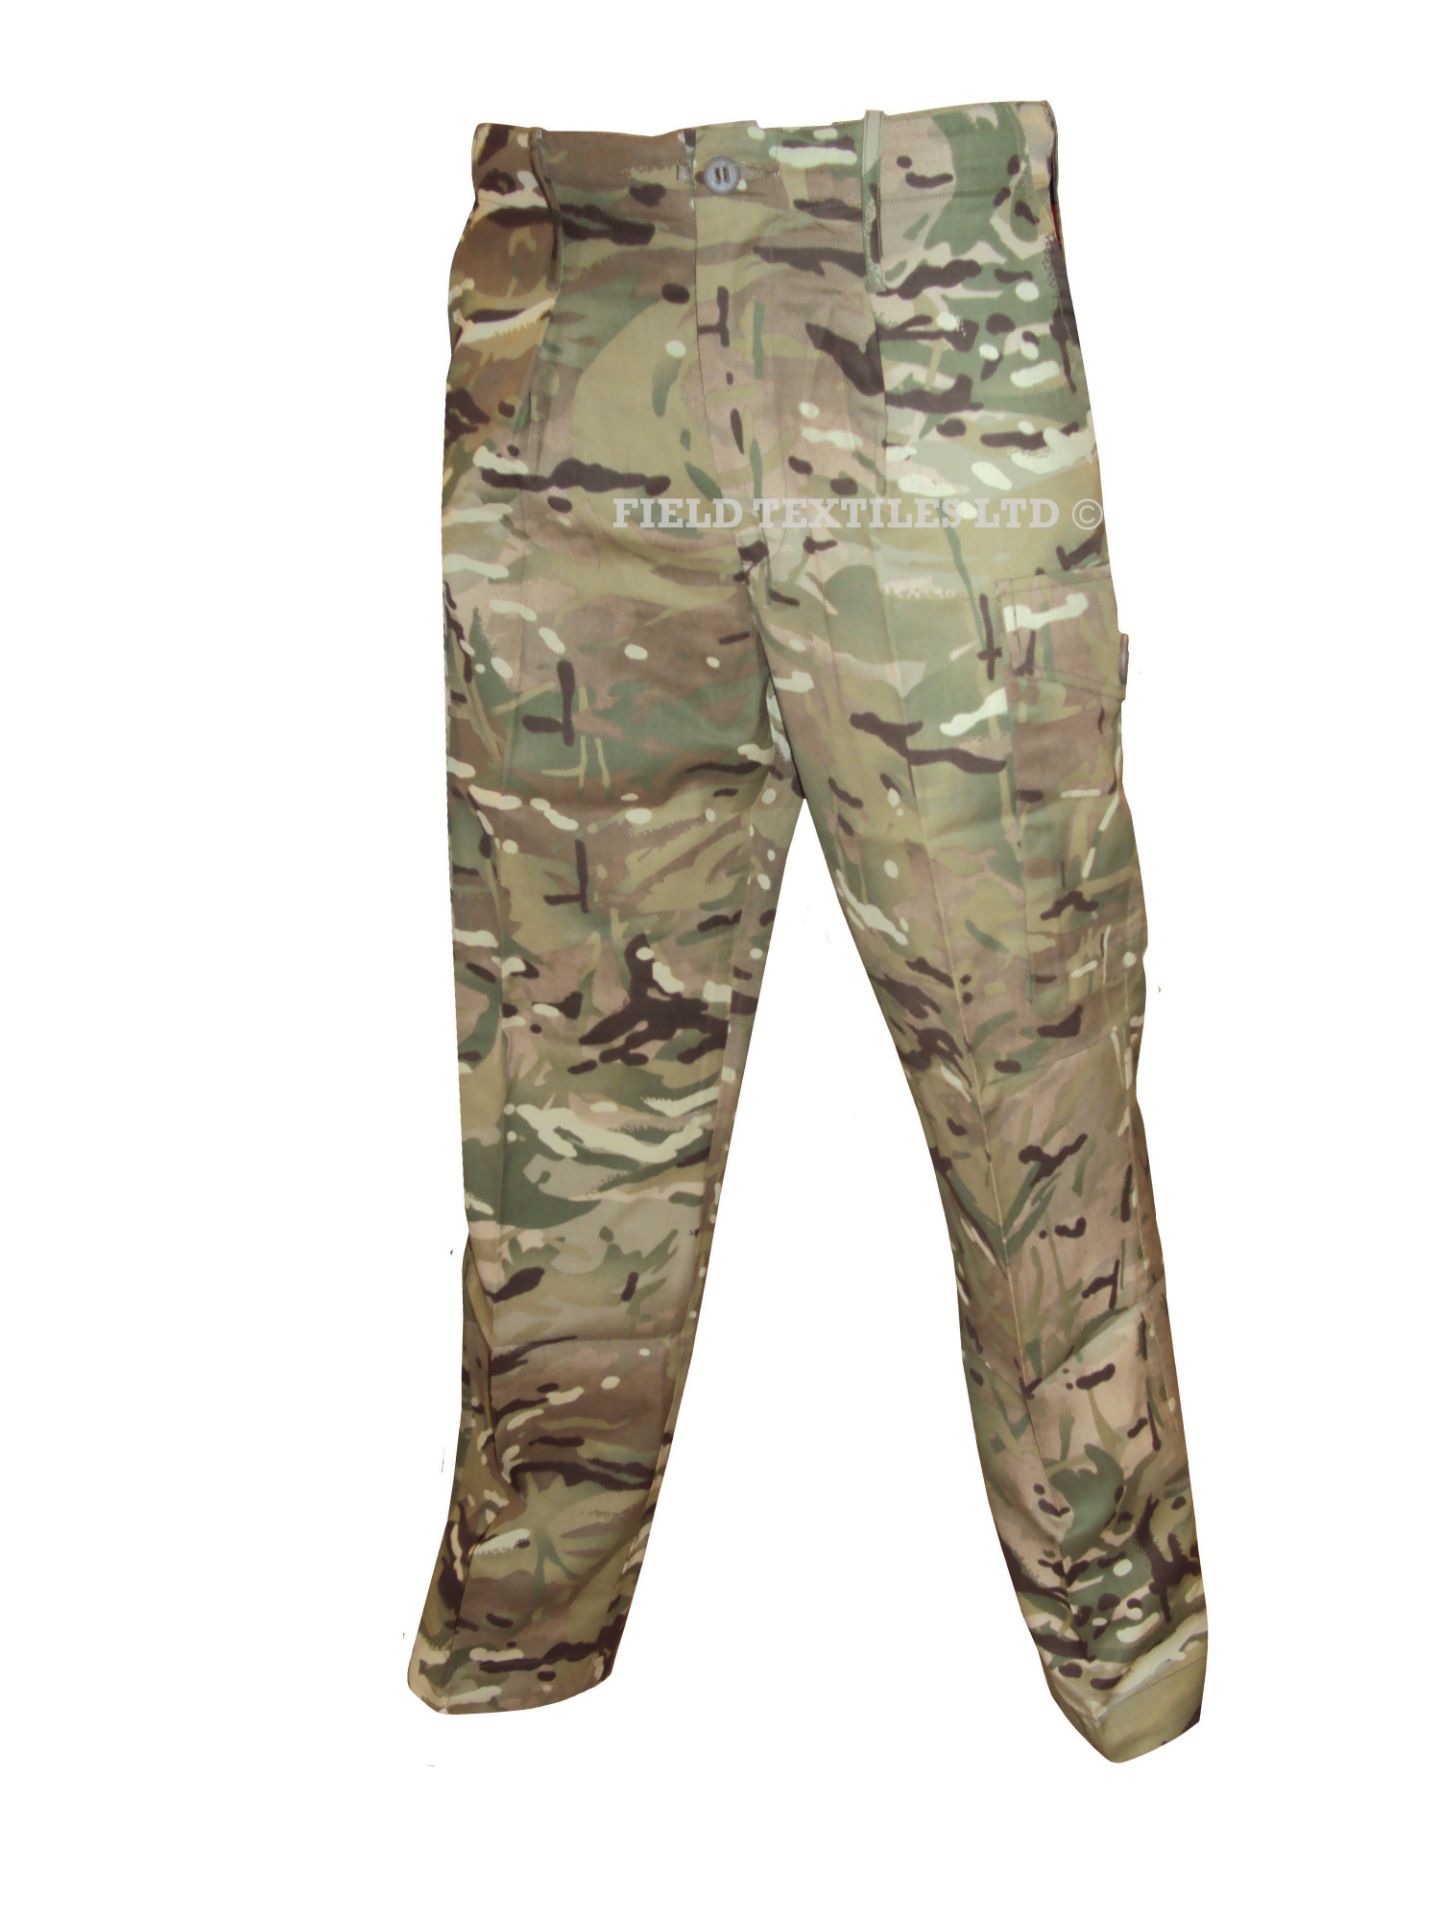 Pack of 10 - MTP trousers - Mix of sizes - grade 1